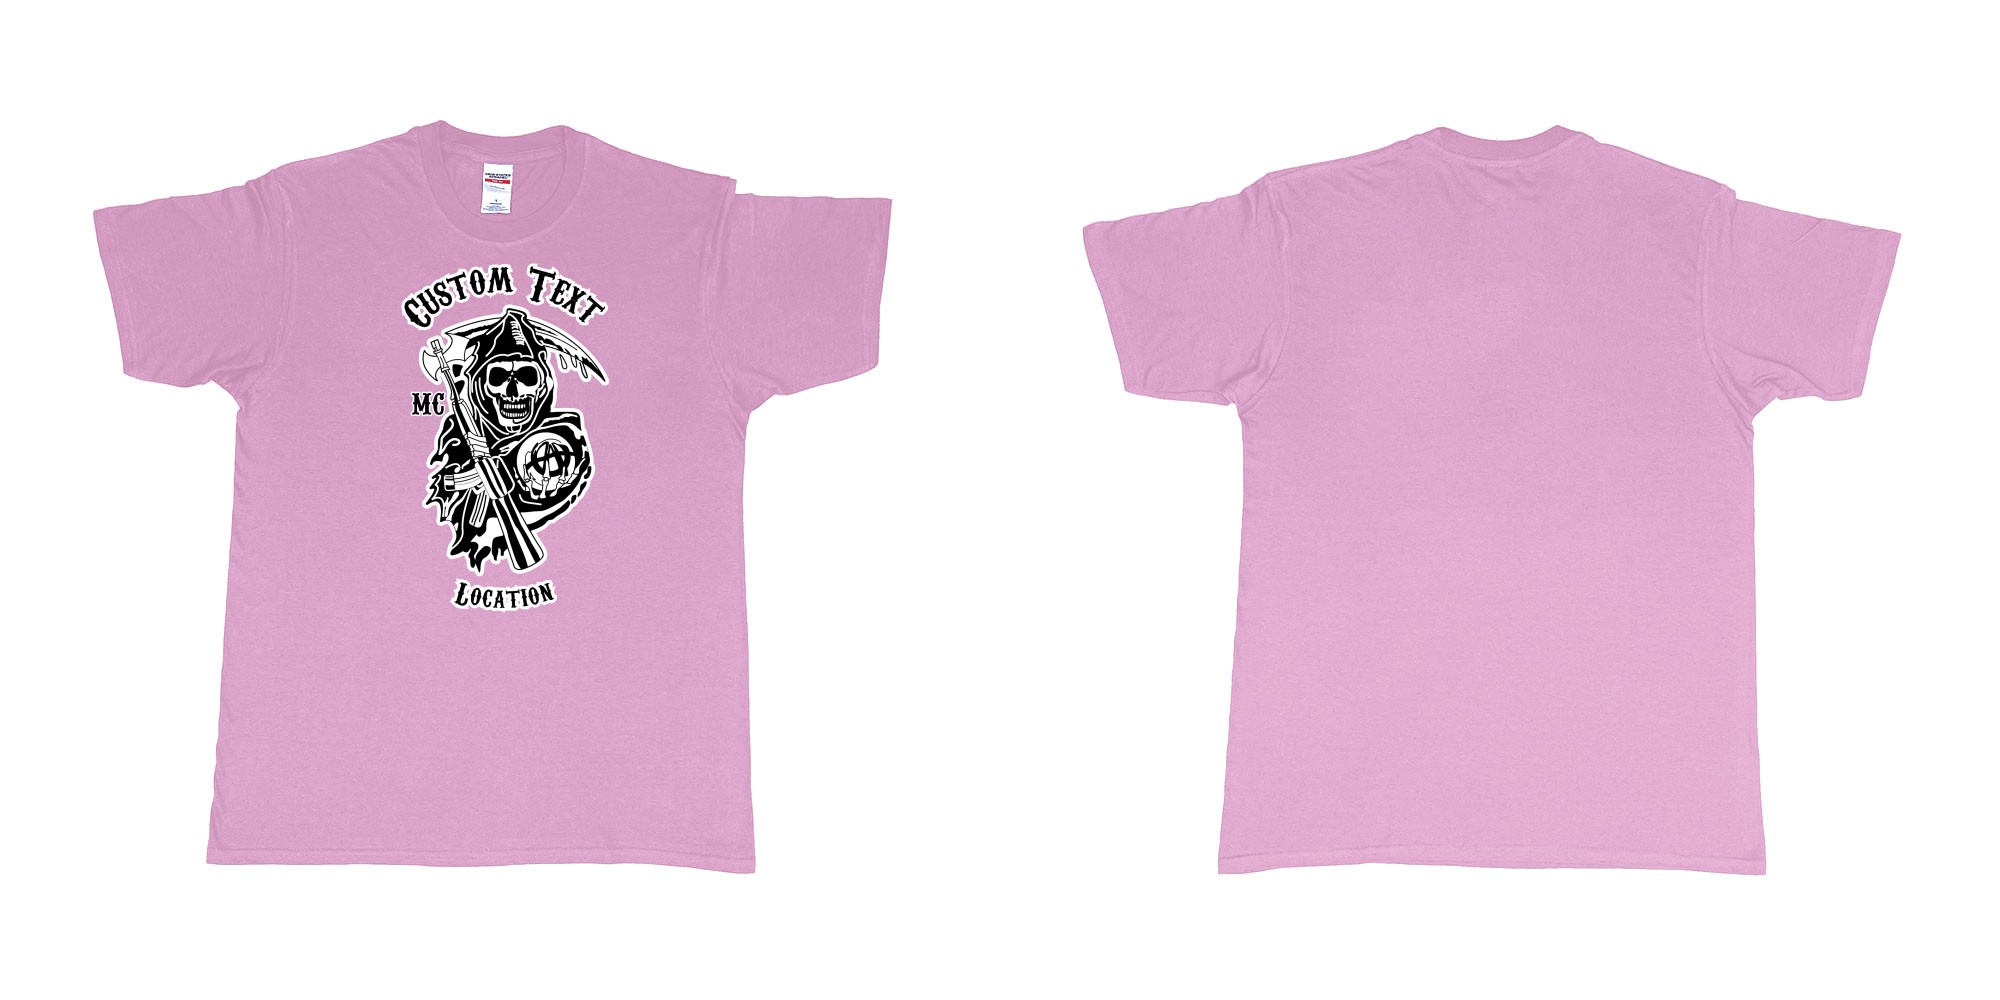 Custom tshirt design son of anarchy logo custom text in fabric color light-pink choice your own text made in Bali by The Pirate Way